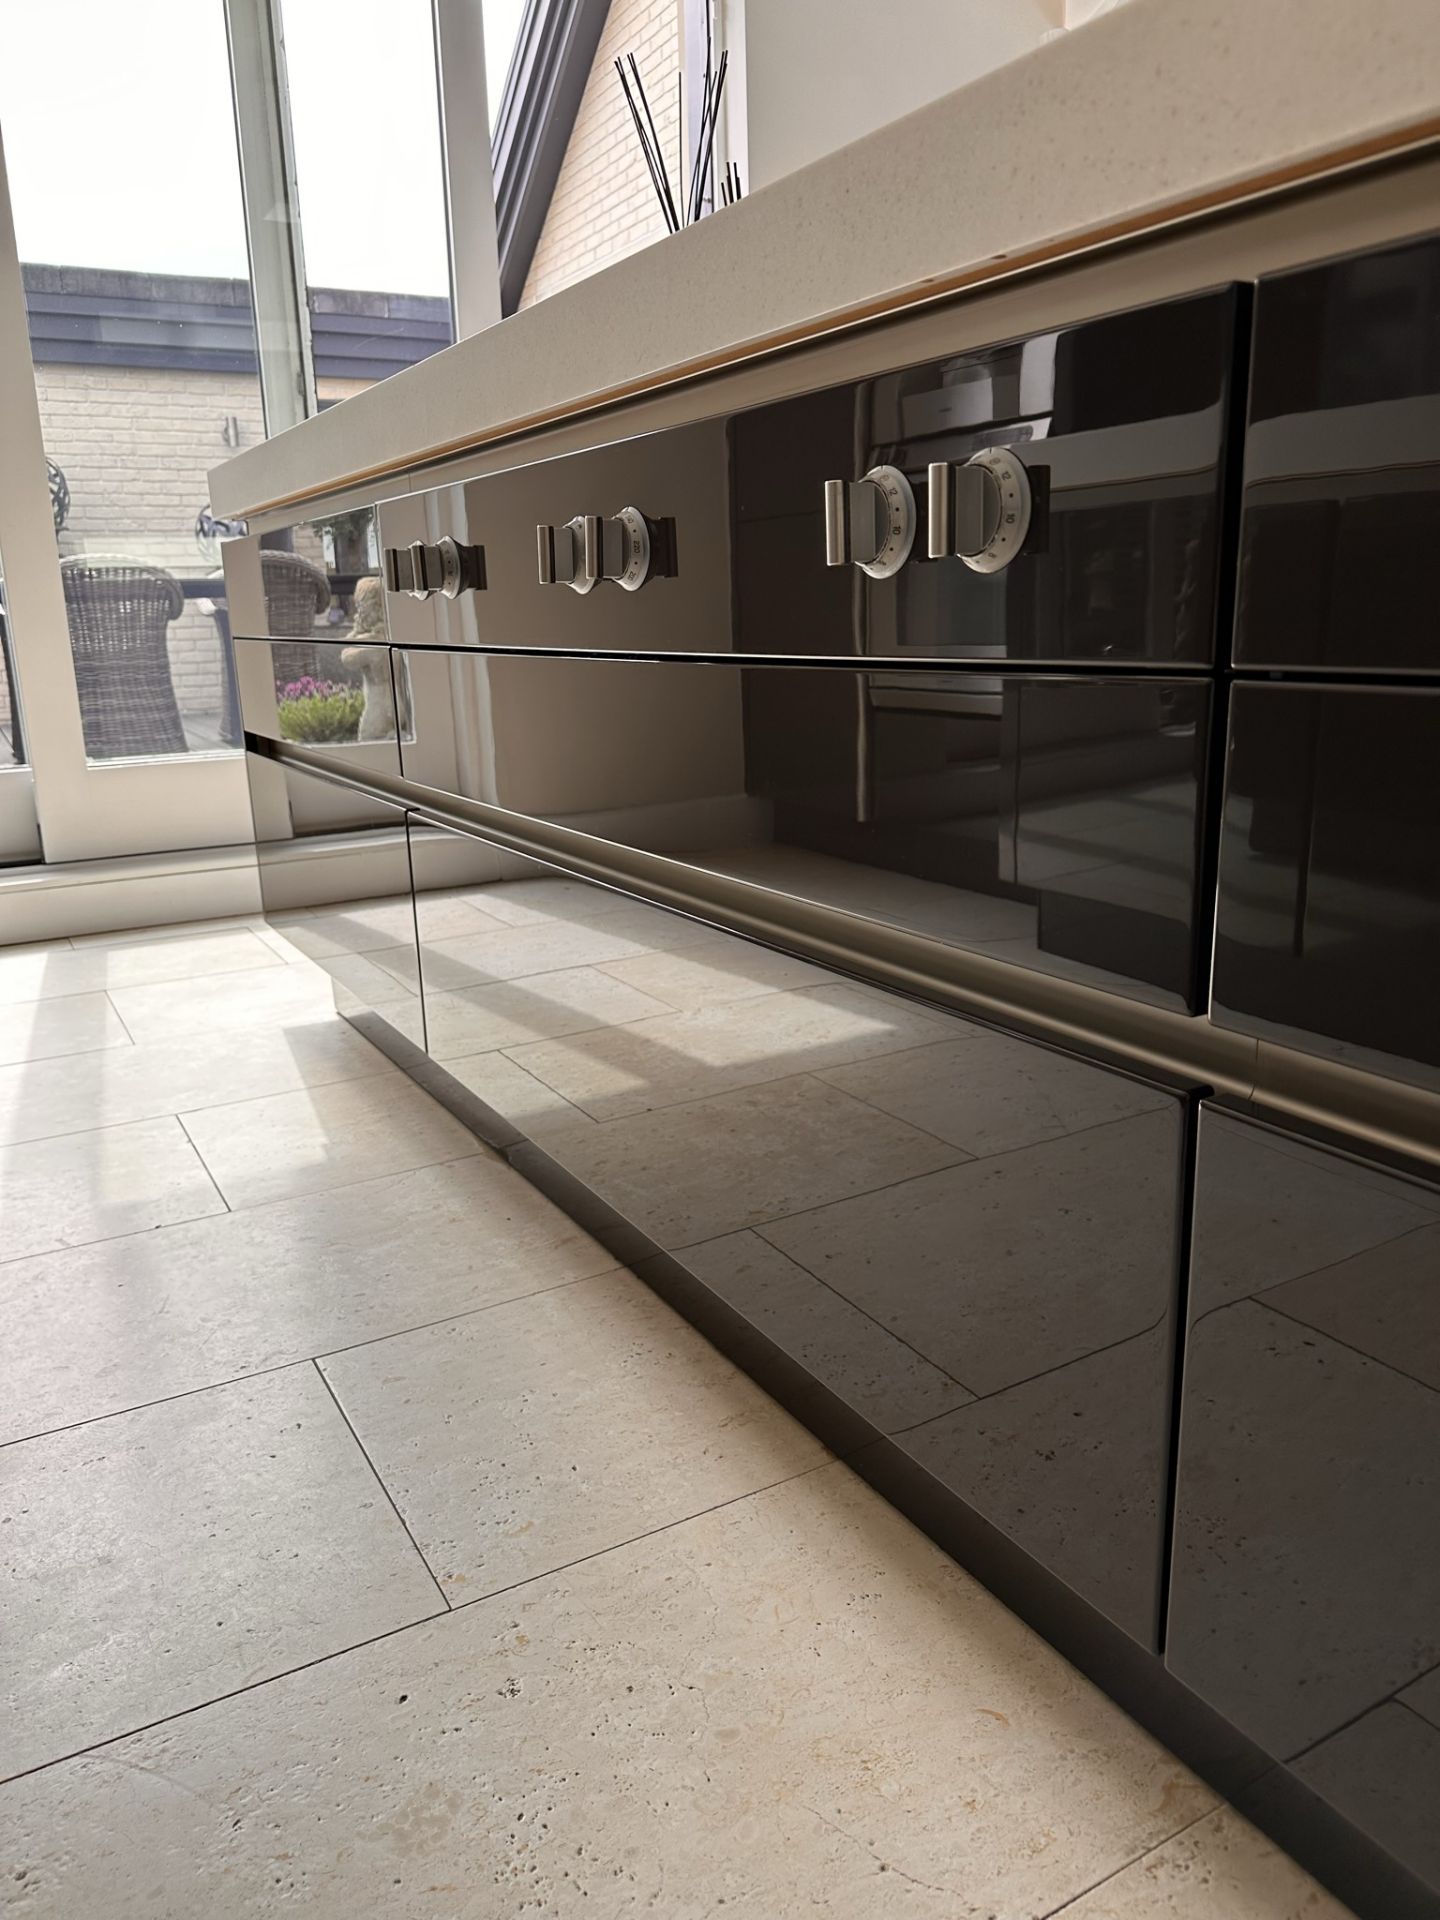 1 x Stunning Bespoke Siematic Gloss Fitted Kitchen With Corian Worktops - In Excellent Condition - - Image 63 of 94